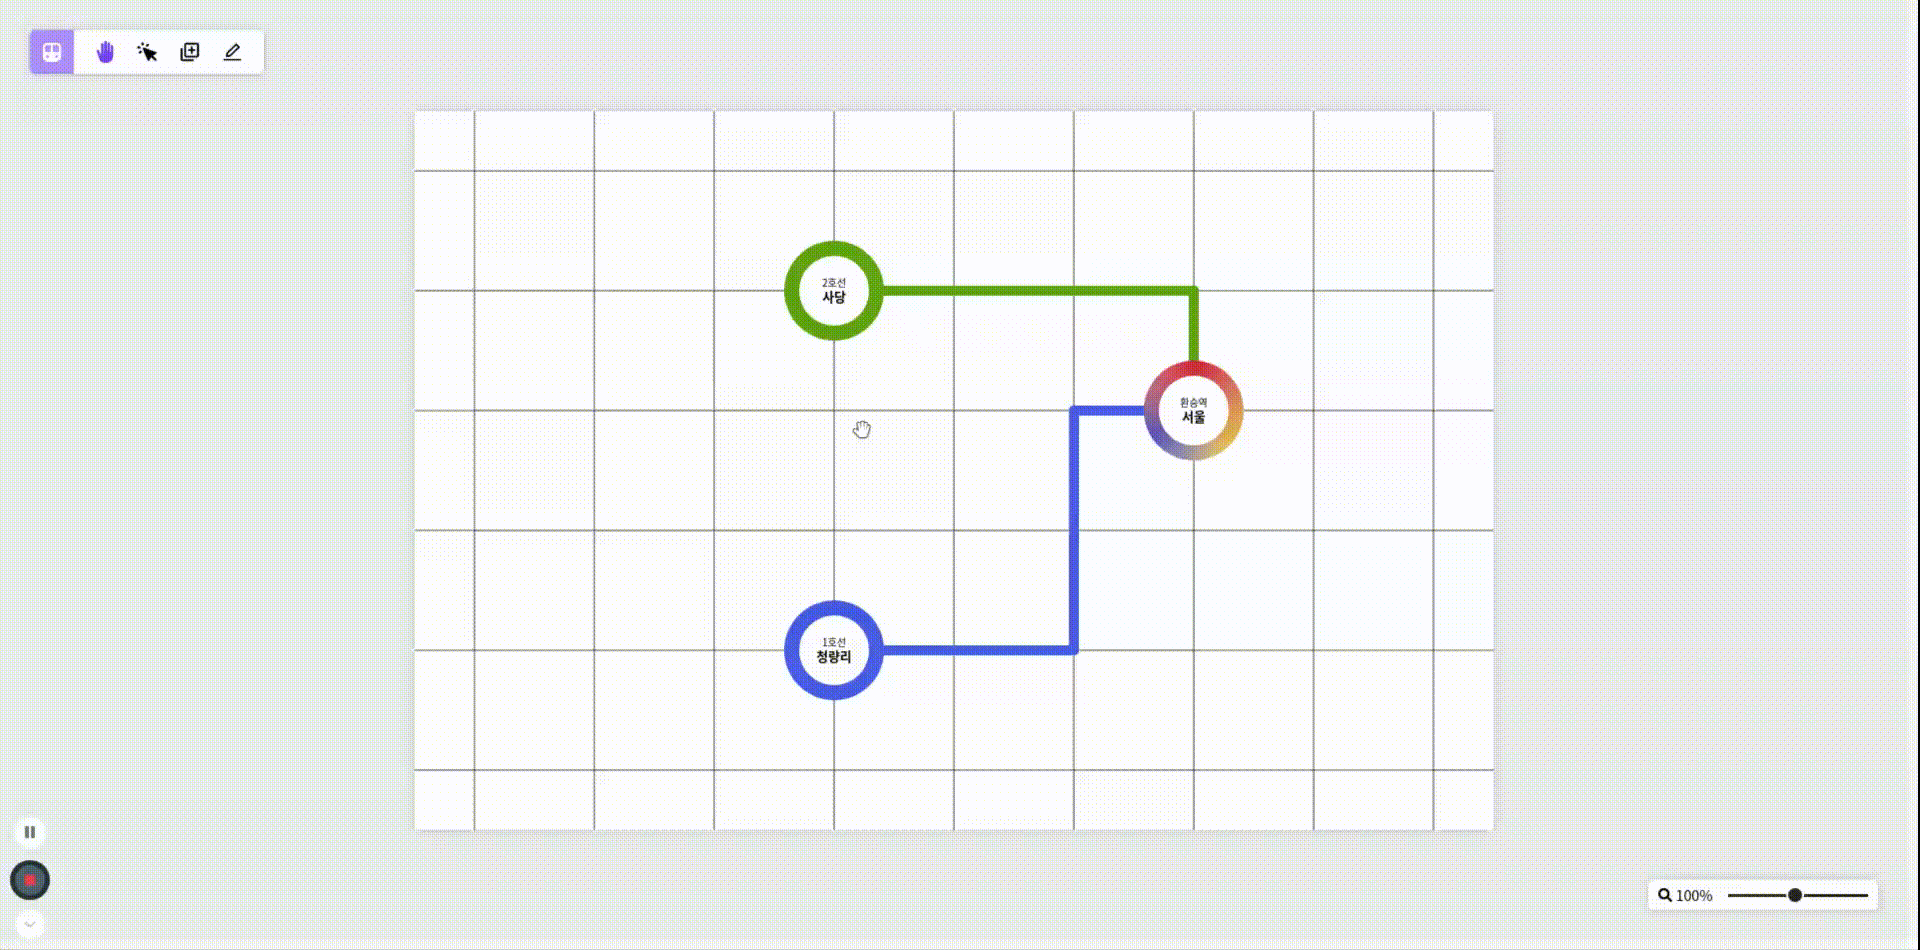 train-map-visualizer-side-project-midterm-review-11.gif